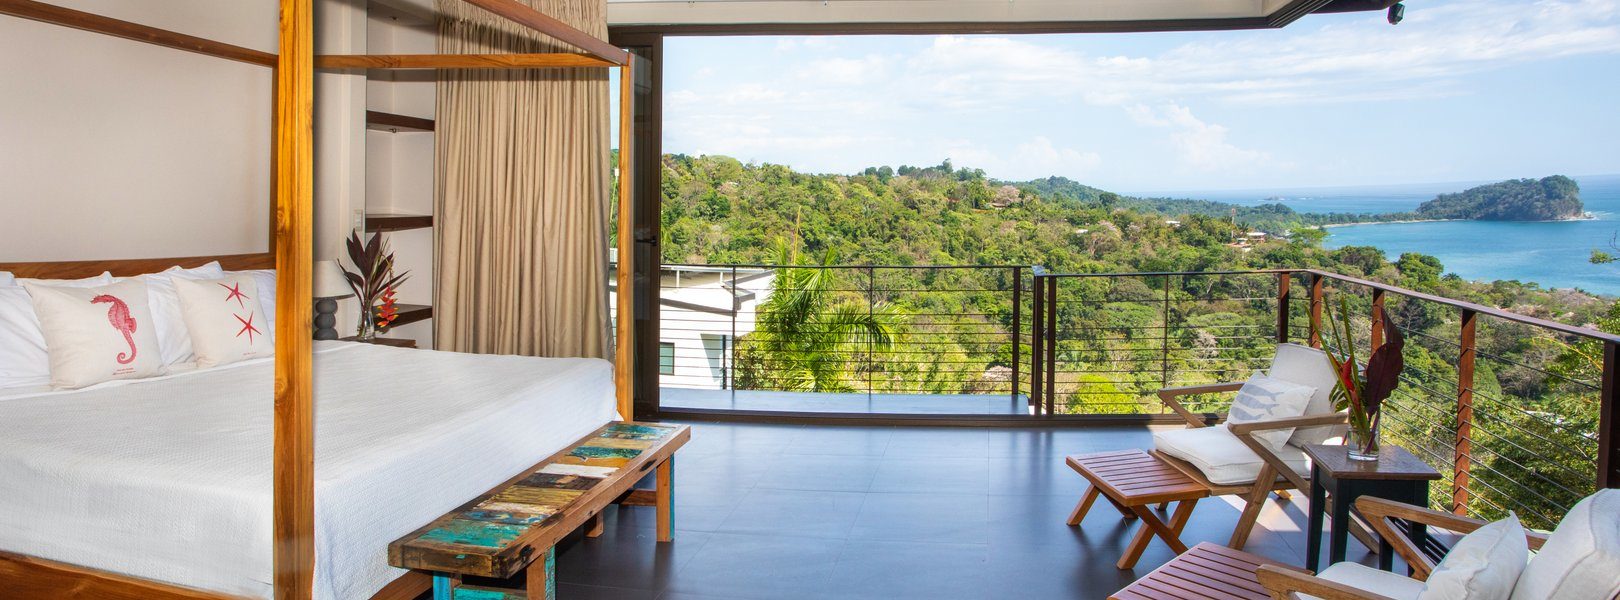 The sky suite on the top level can be opened up to enjoy the ocean breeze and natural surroundings of Manuel Antonio.